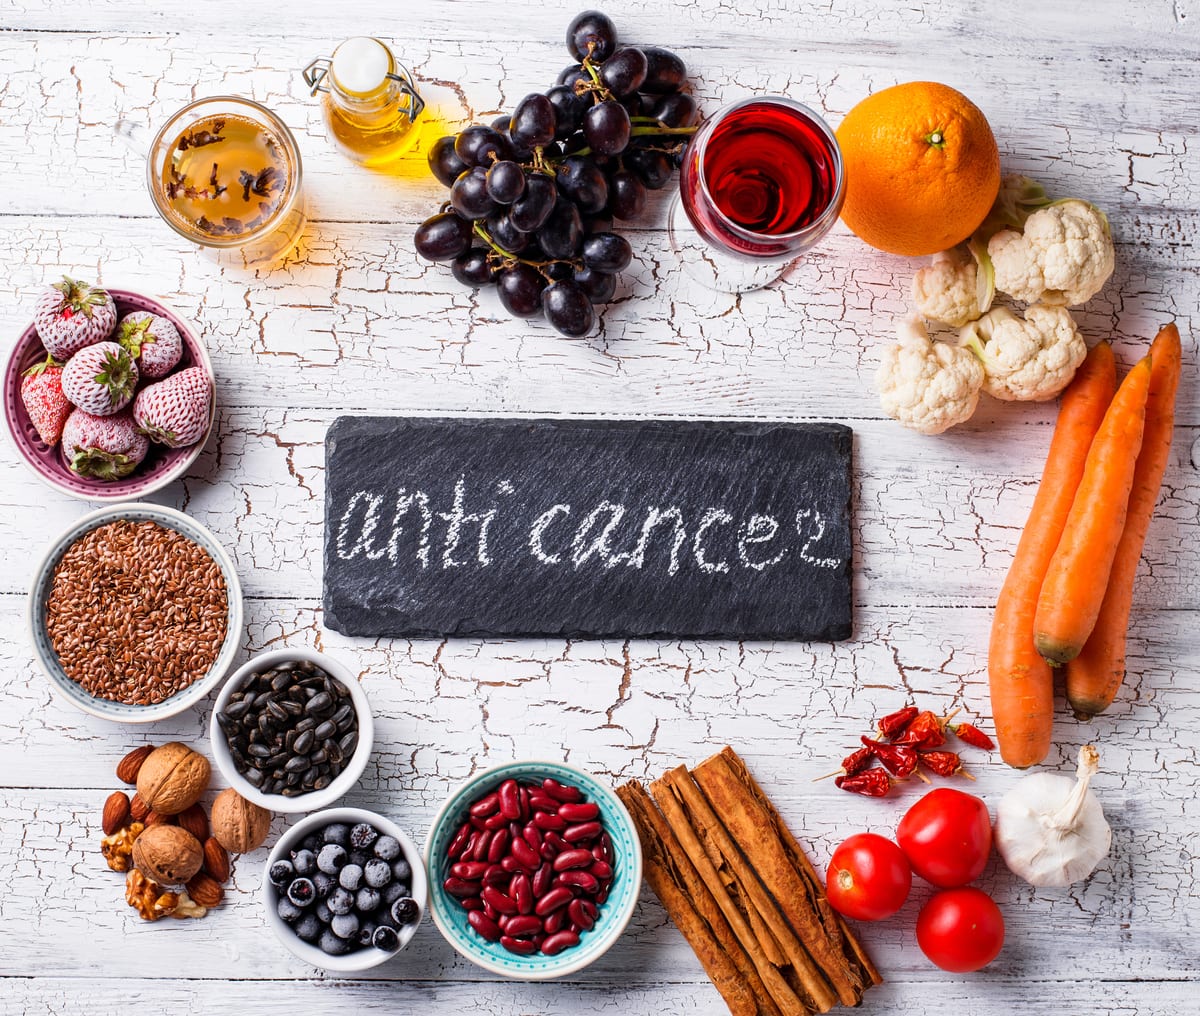 Fruits and Vegetables That Help Fight Cancer